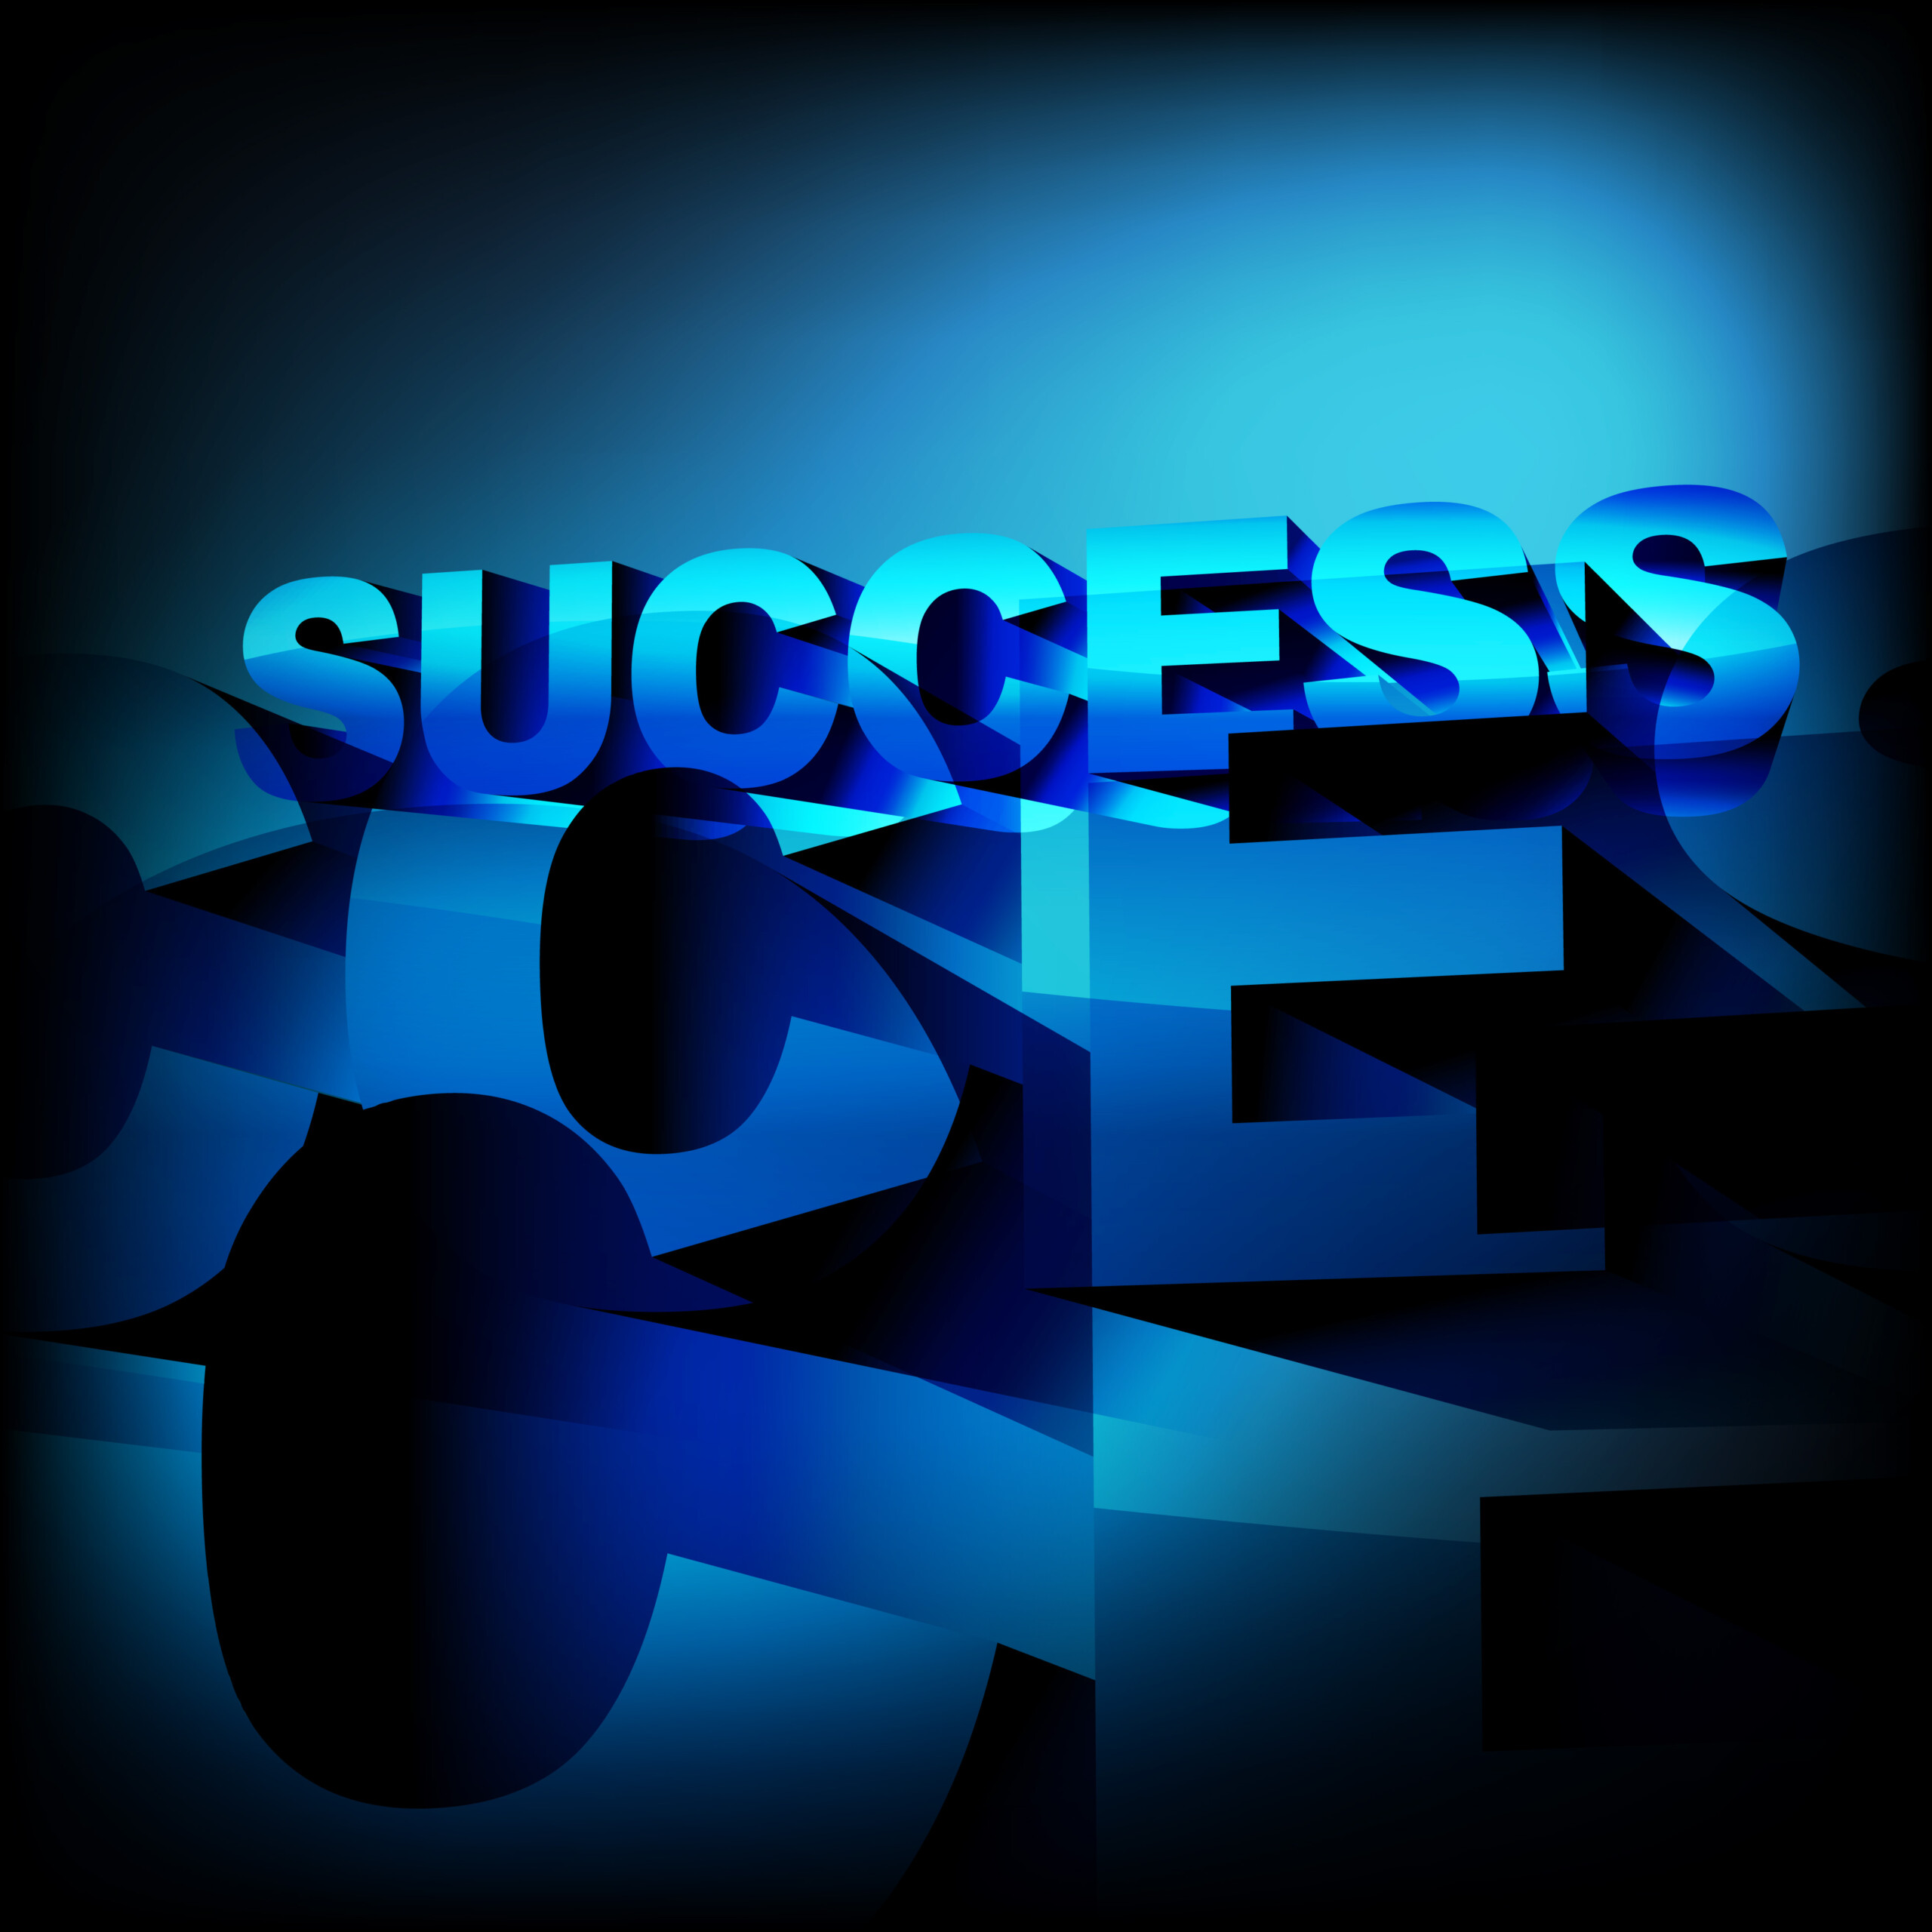 abstract success eps10 vector background